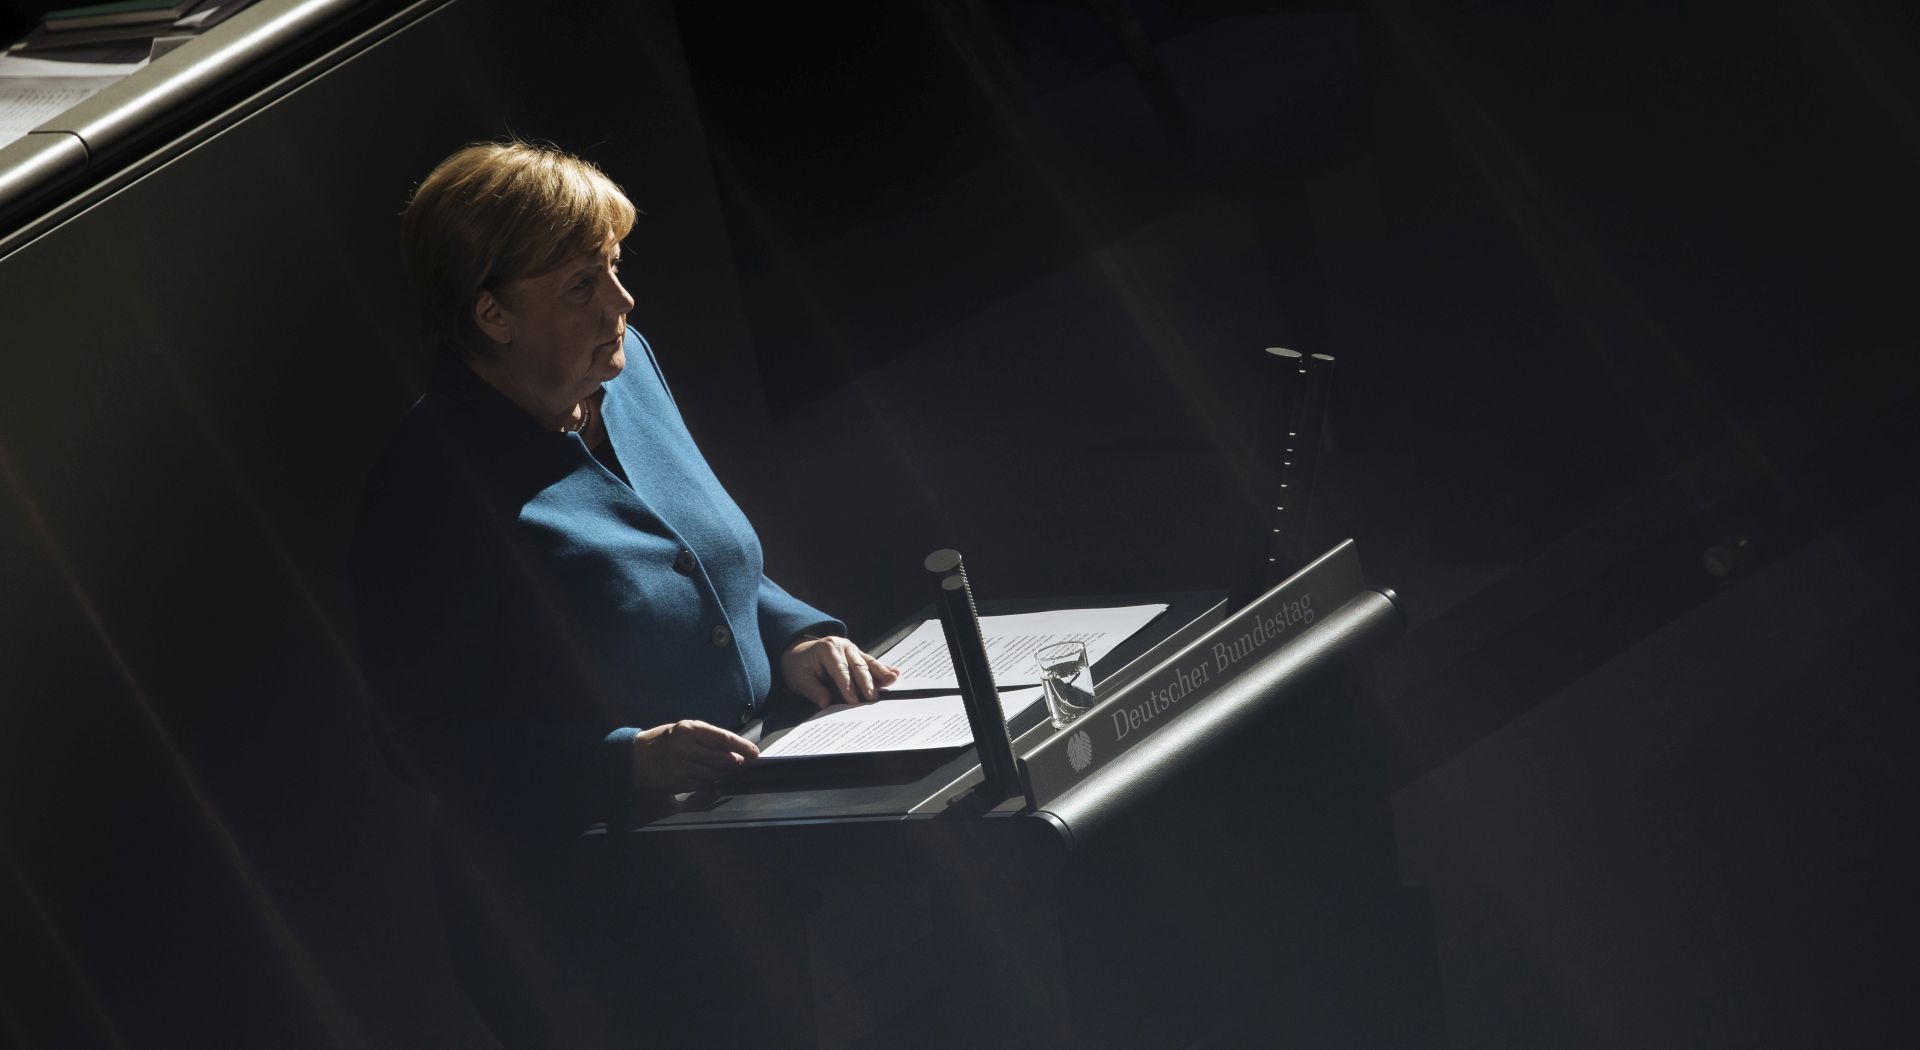 epa07099574 German Chancellor Angela Merkel delivers a statement at the German Parliament, the Bundestag, in Berlin, Germany, 17 October 2018. Merkel gave a government statement regarding the European Council on 17 and 18 October 2018 in Brussels and the upcoming Asia-Europe Summit (ASEM)  EPA/KAMIL ZIHNIOGLU